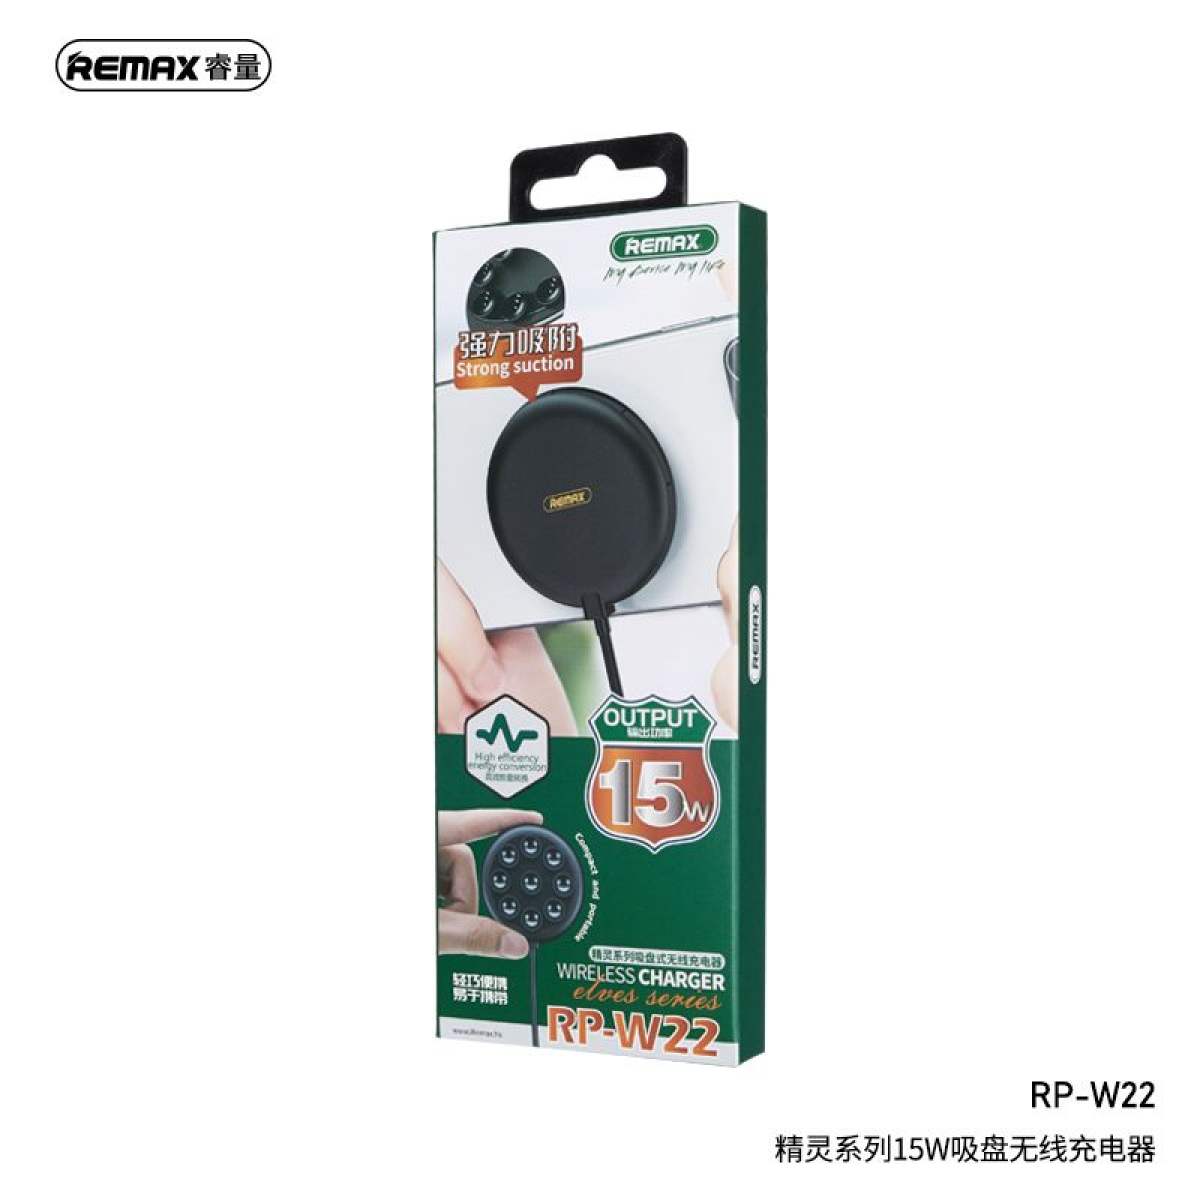 REMAX Elves Series 15W Sucked-type Wireless Charger RP-W22